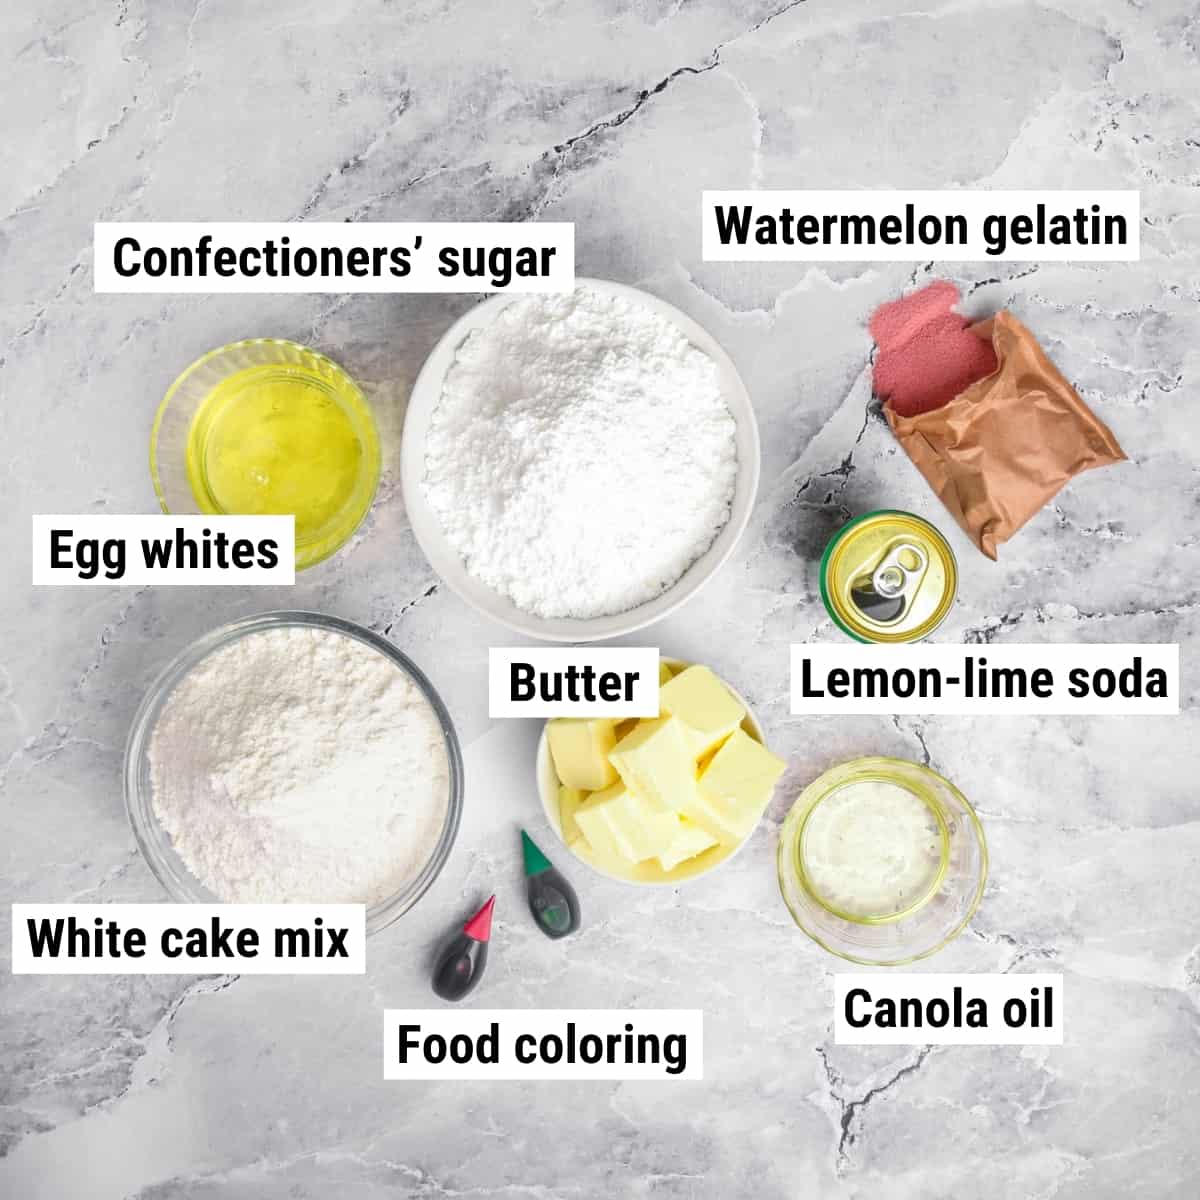 The ingredients used to make watermelon cupcakes laid out on a table.